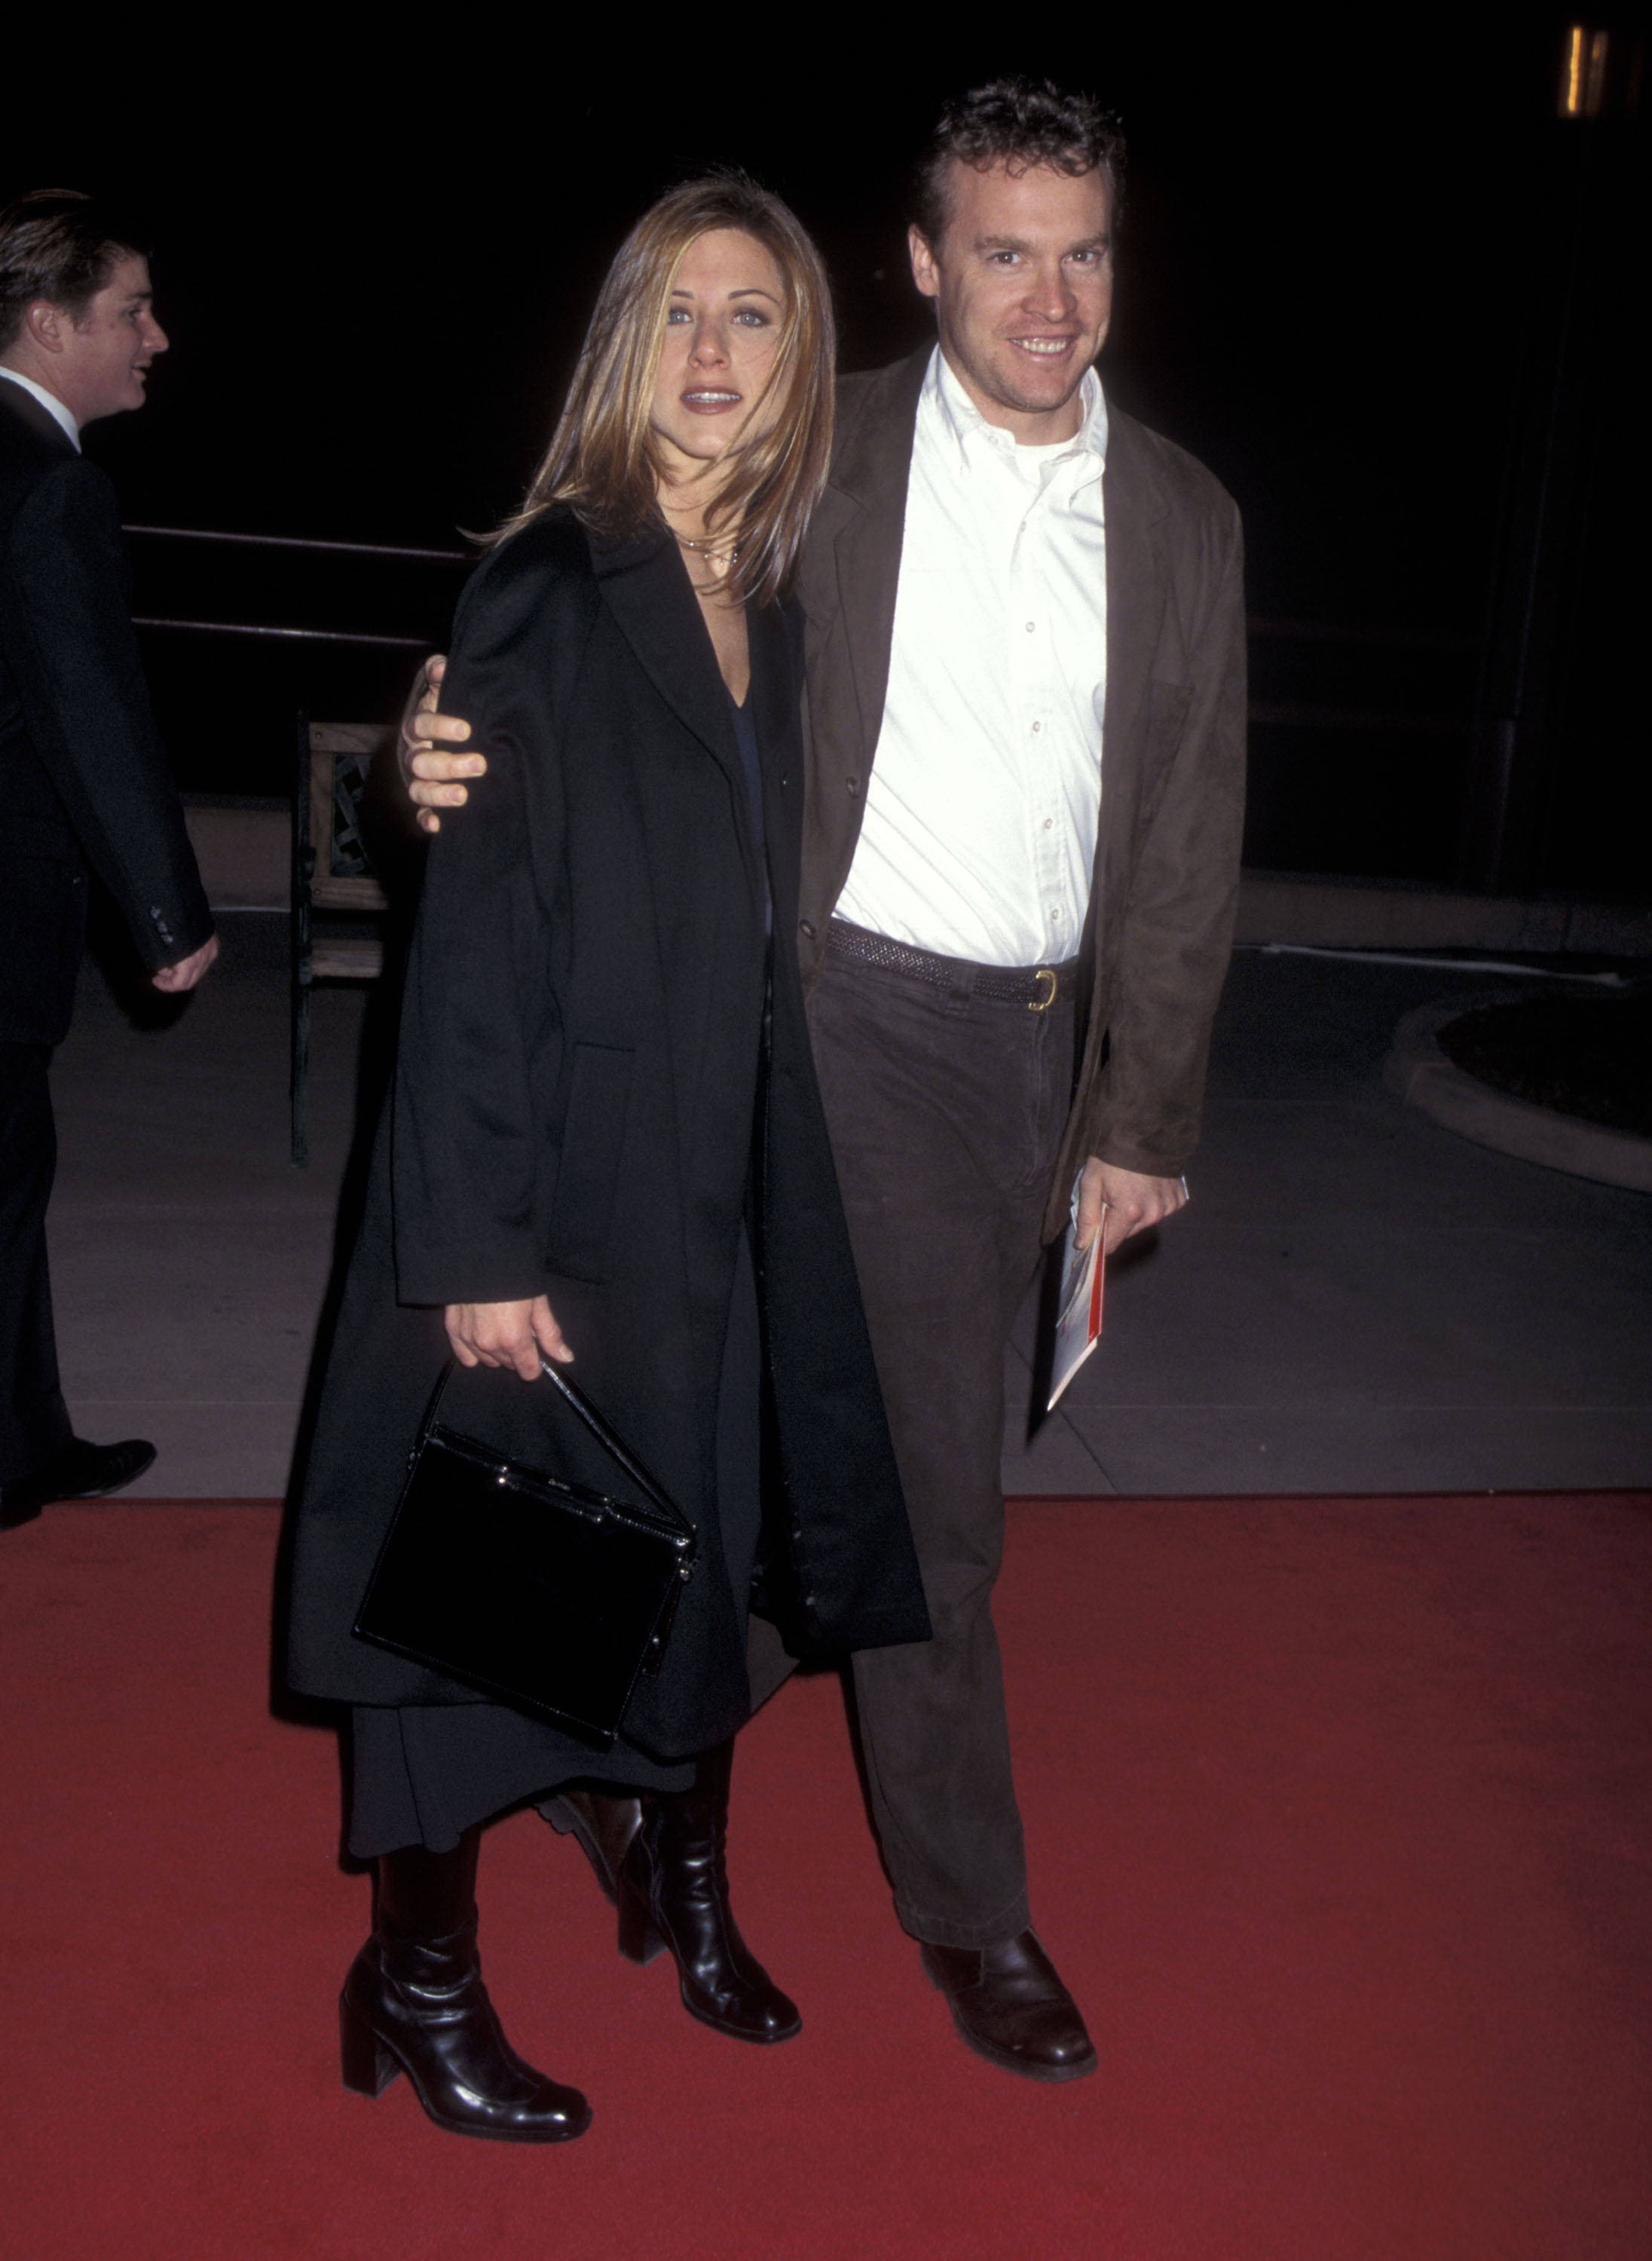 Jennifer Aniston and Tate Donovan during the "Dante's Peak" premiere on February 5, 1997 in Universal City, California | Source: Getty Images